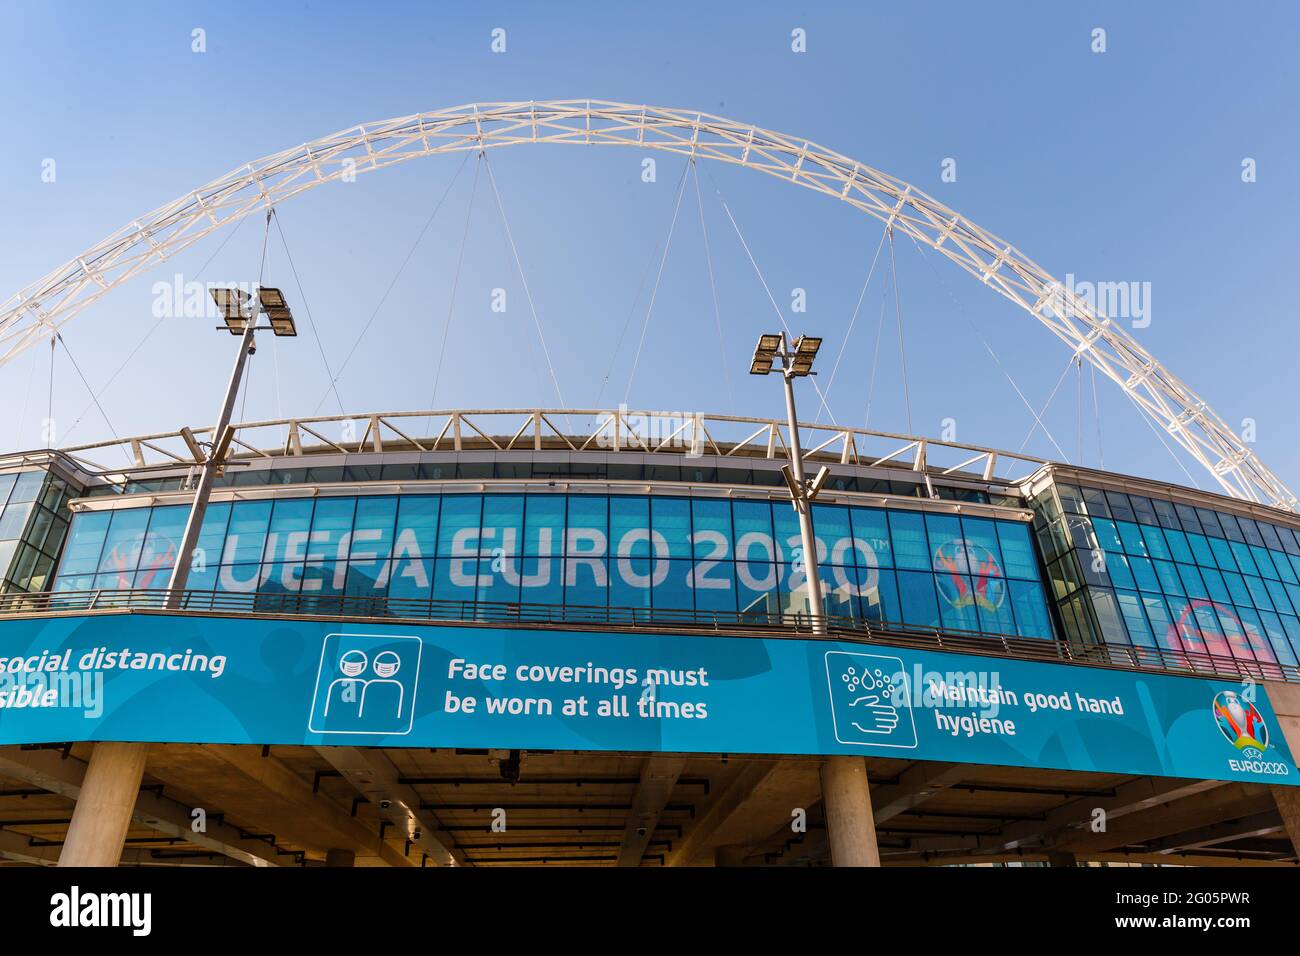 Wembley Stadium, Wembley Park, UK. 1st June 2021.   Postponed by the Coronavirus pandemic, Wembley is finally starting to take shape for the Euro 2020 - UEFA European Football Championship with Wembley Stadium's display now showing the Euro 2020 logo and artwork.   Gareth Southgate is set to confirm his 26-man England squad ahead of UEFA deadline this evening.  Amanda Rose/Alamy Live News Stock Photo